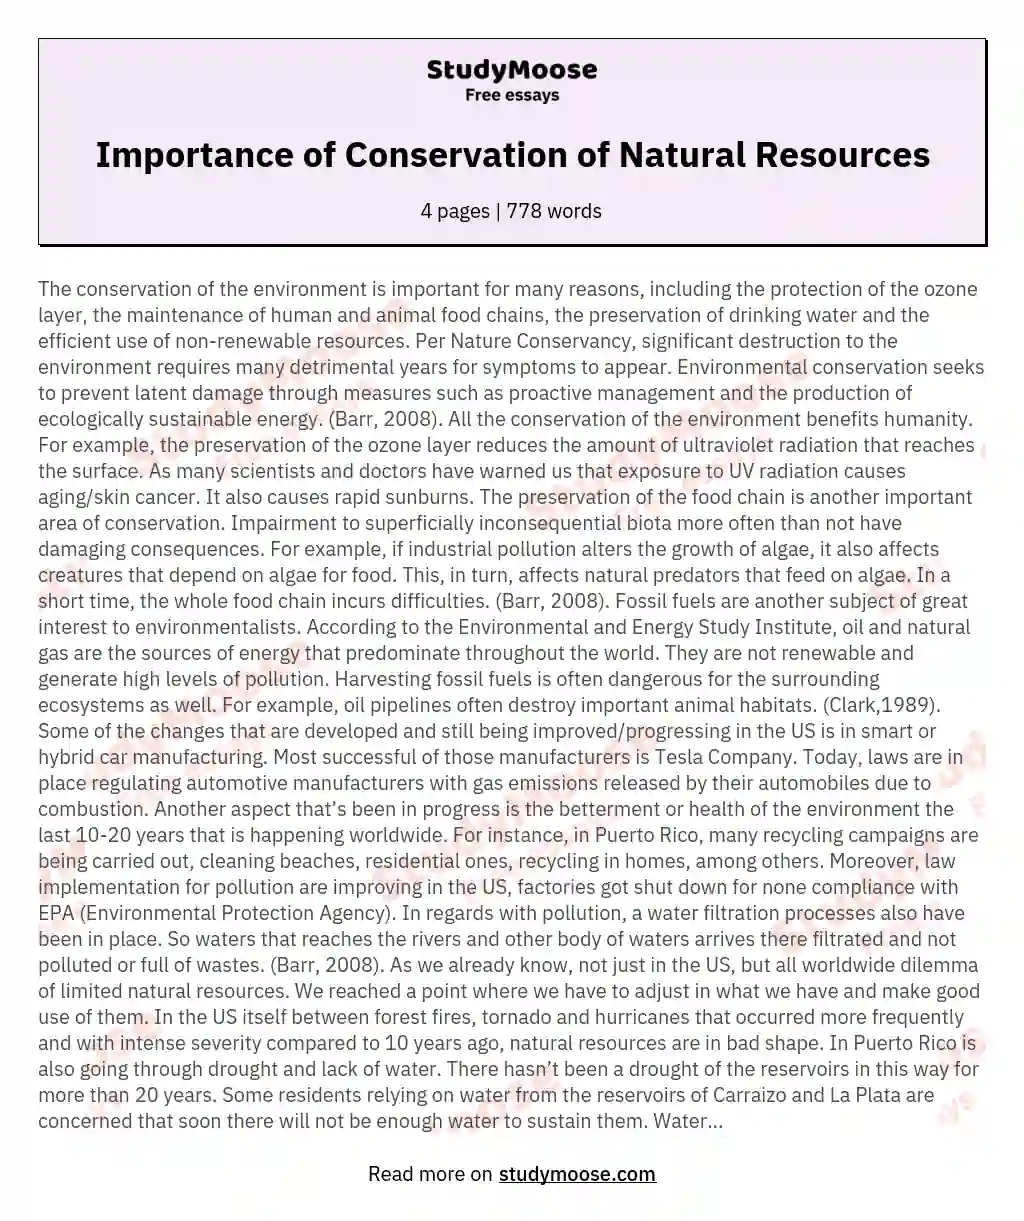 Importance of Conservation of Natural Resources essay